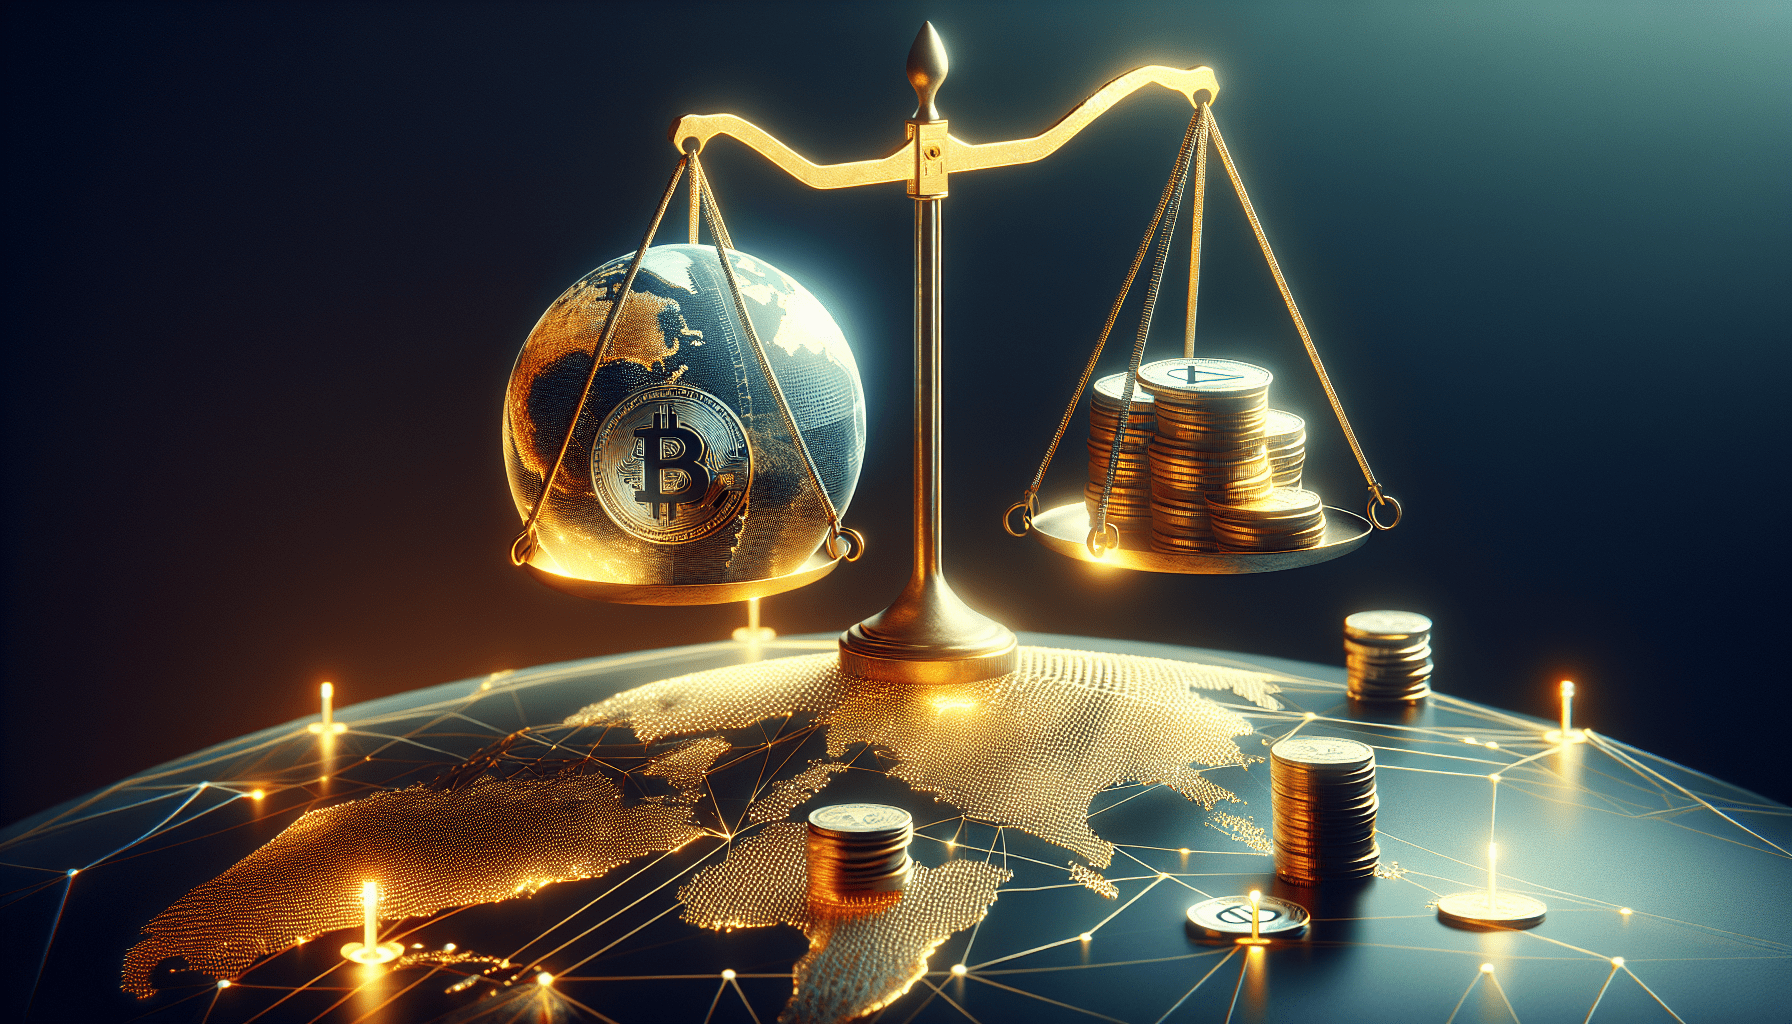 What Is The Potential Impact Of Stablecoins On Global Financial Stability?